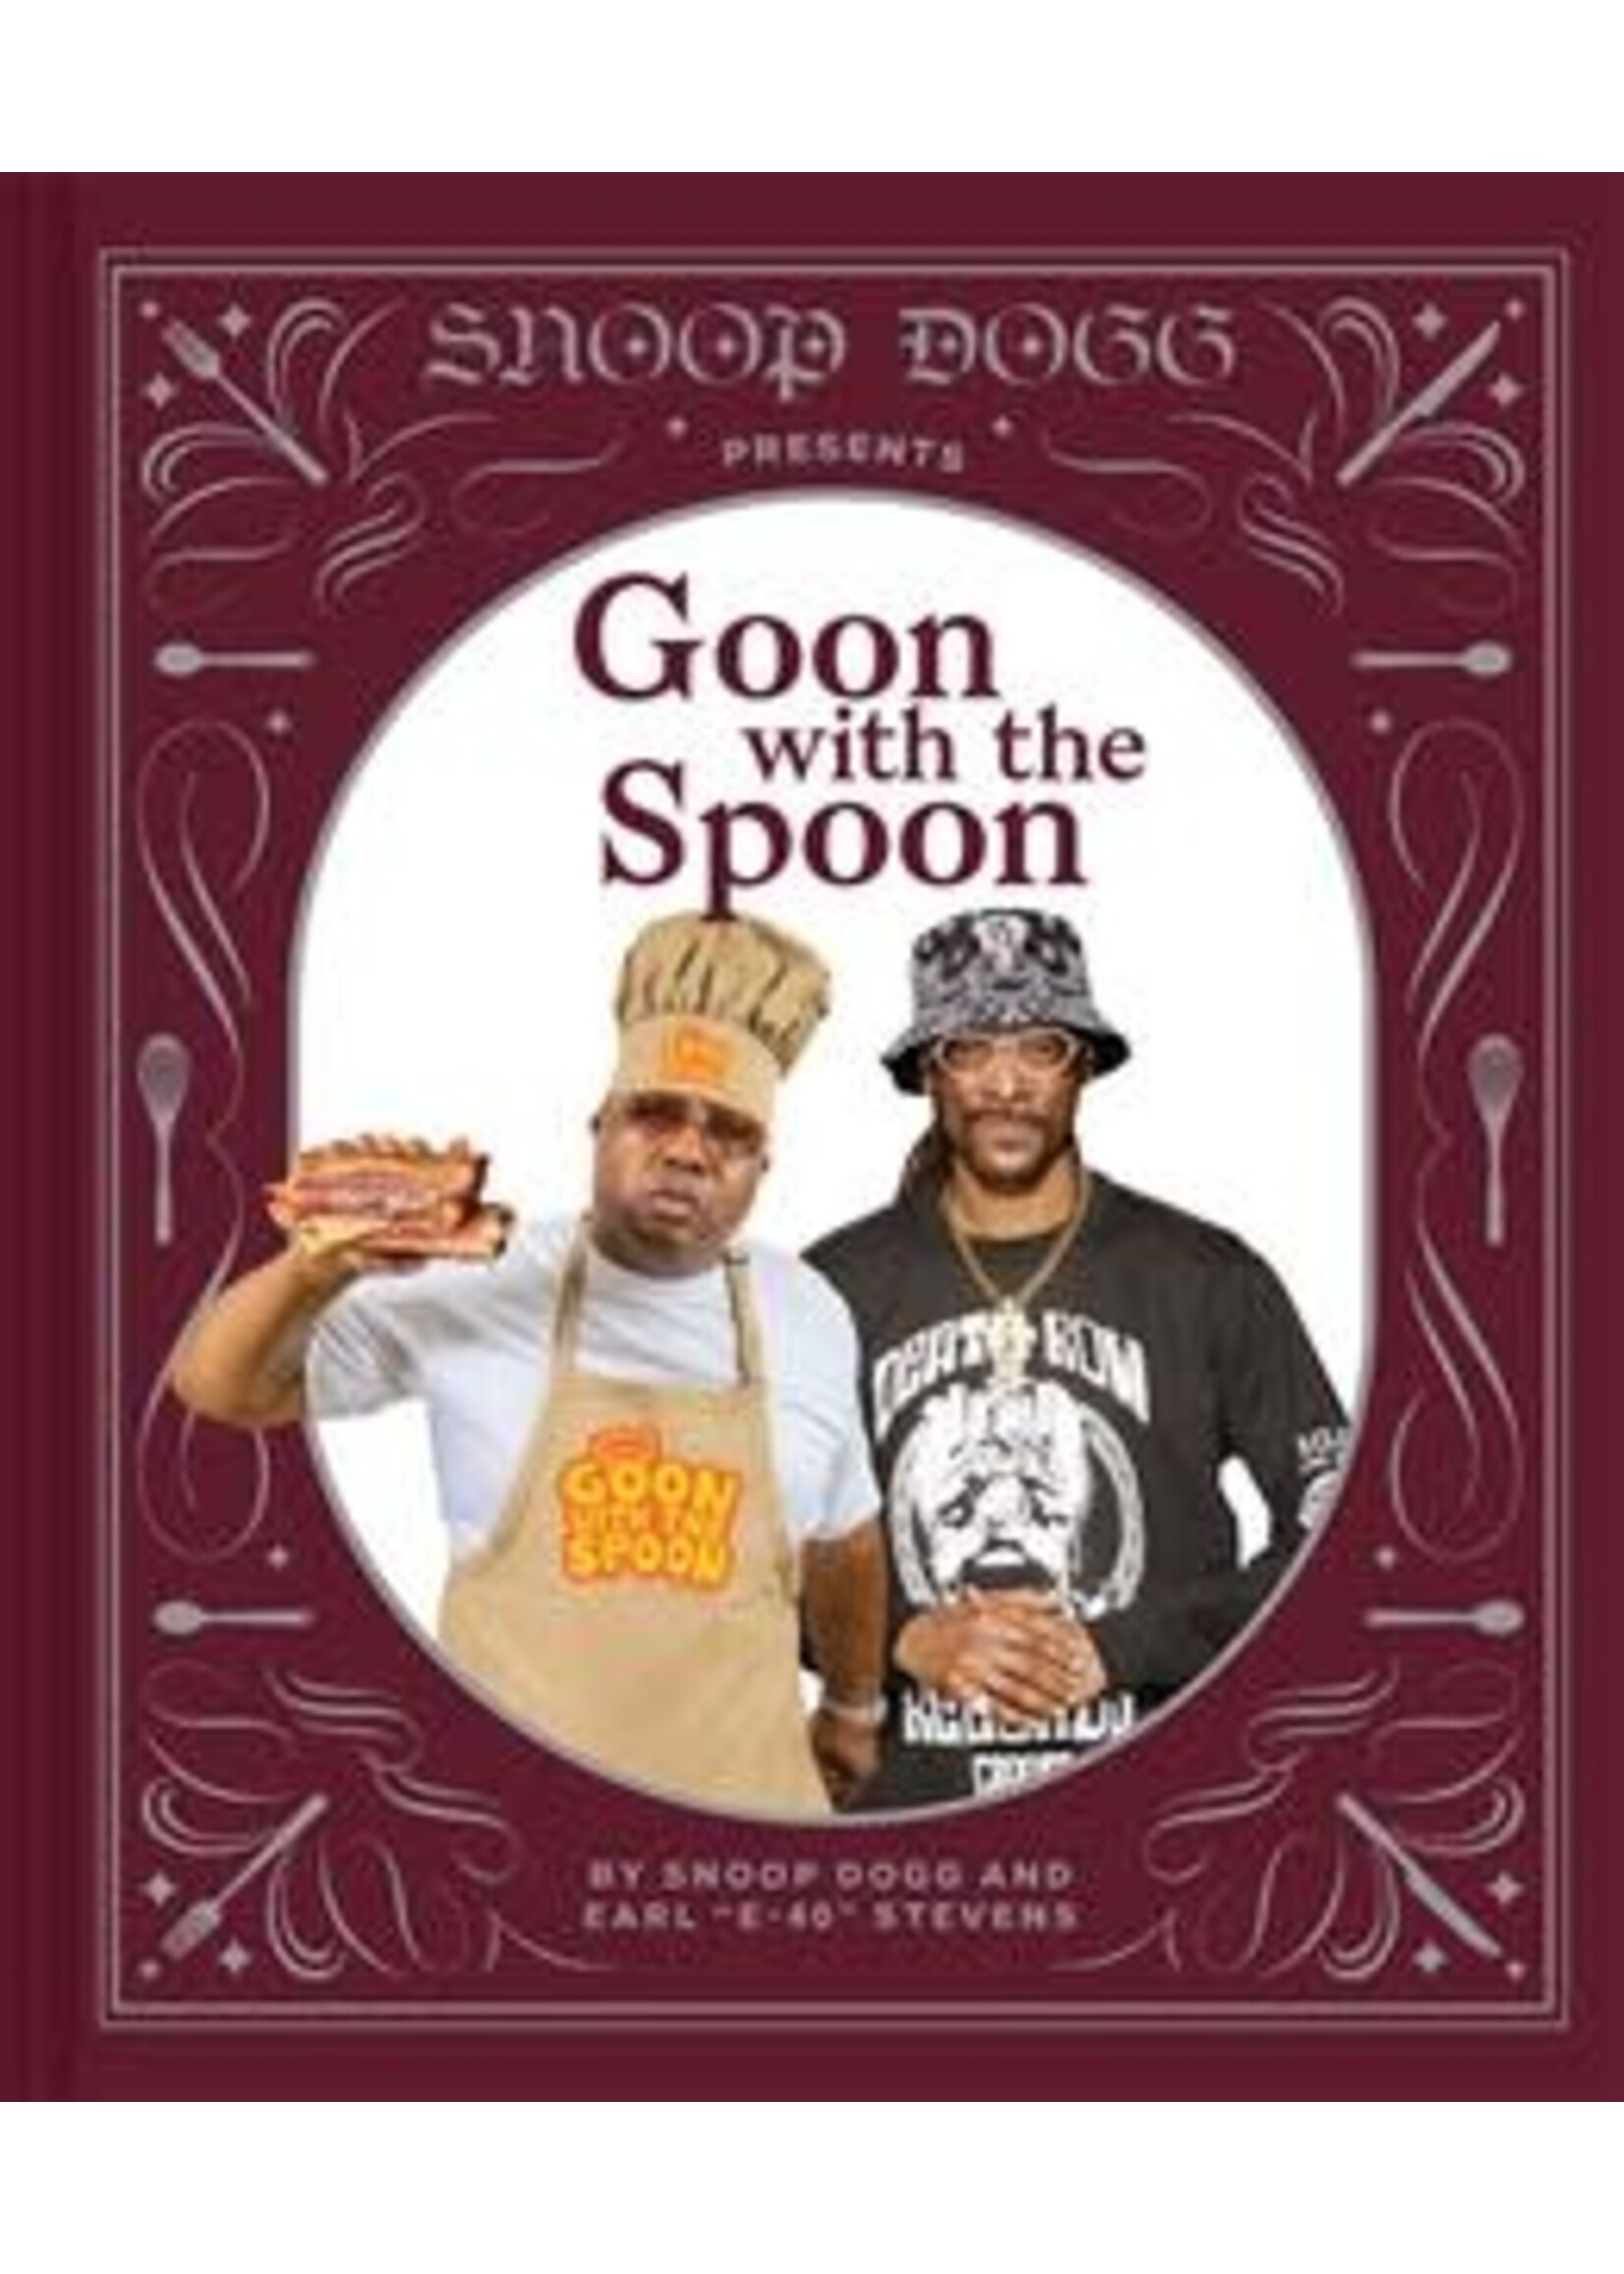 Snoop Dogg Presents Goon with the Spoon by Snoop Dogg, Earl "E-40" Stevens, Antonis Achilleos